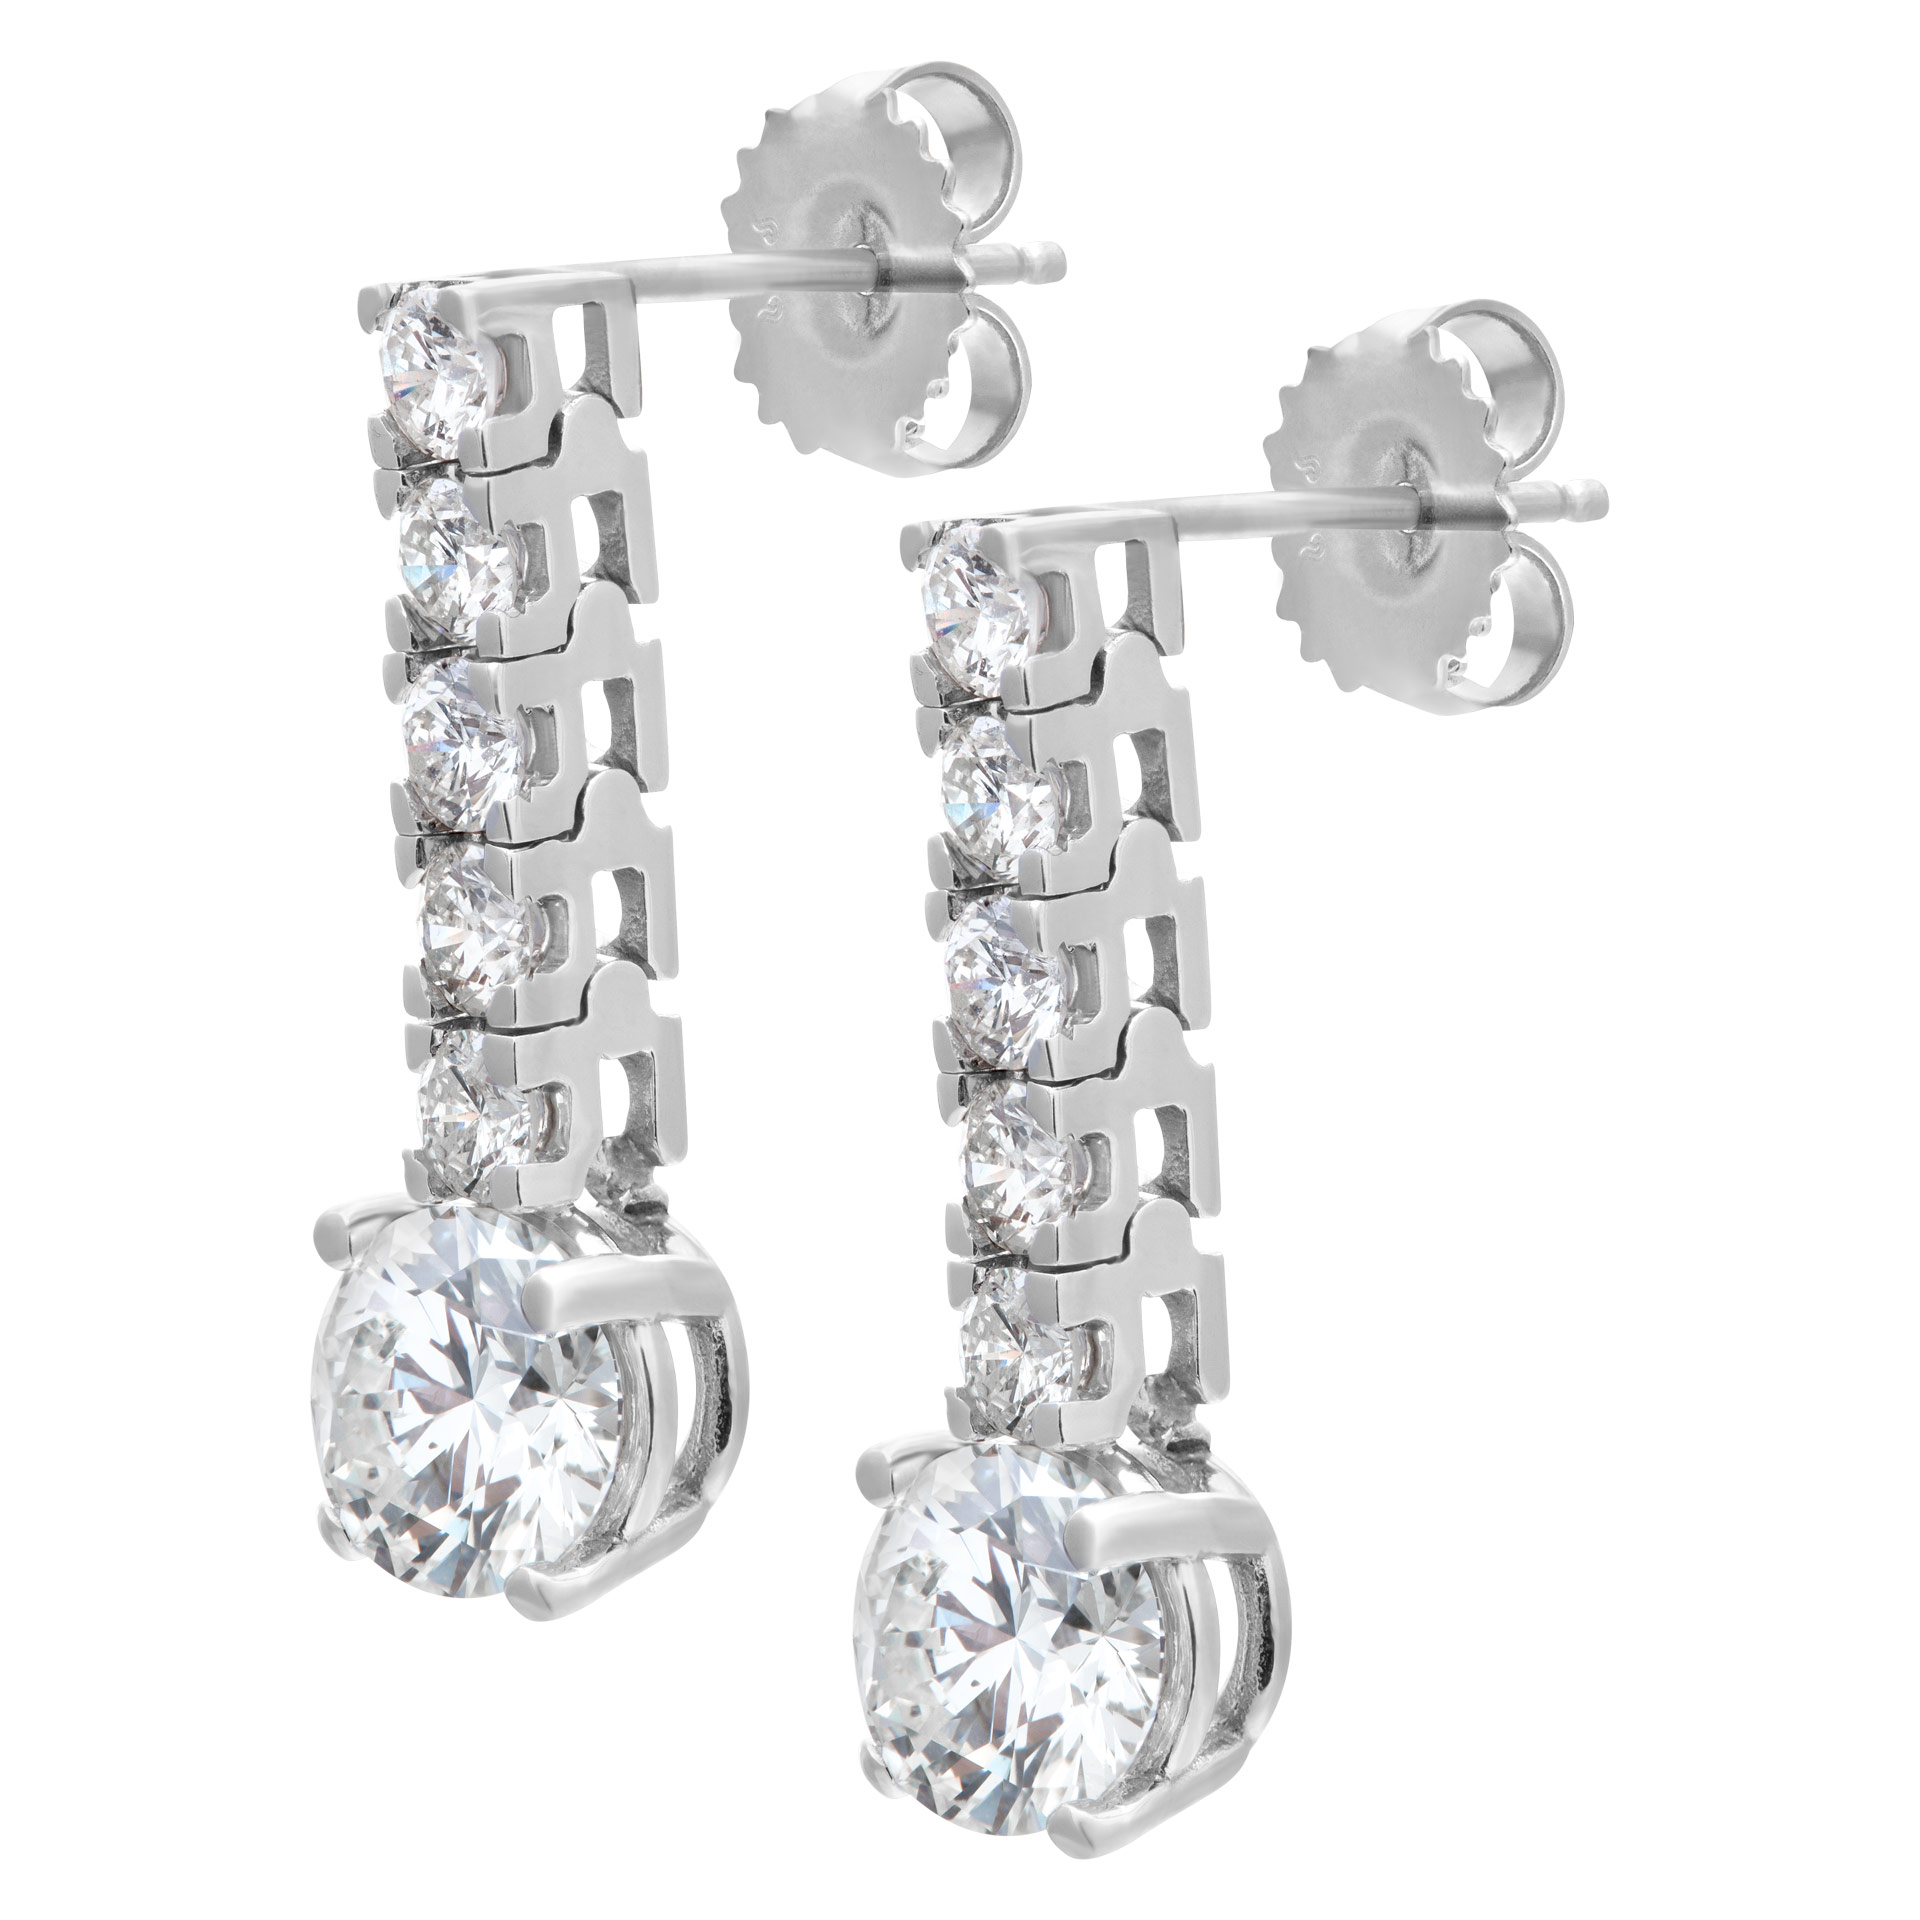 Line of diamond earrings. Approx. 1 carat each with additional 1 ct in line. image 3